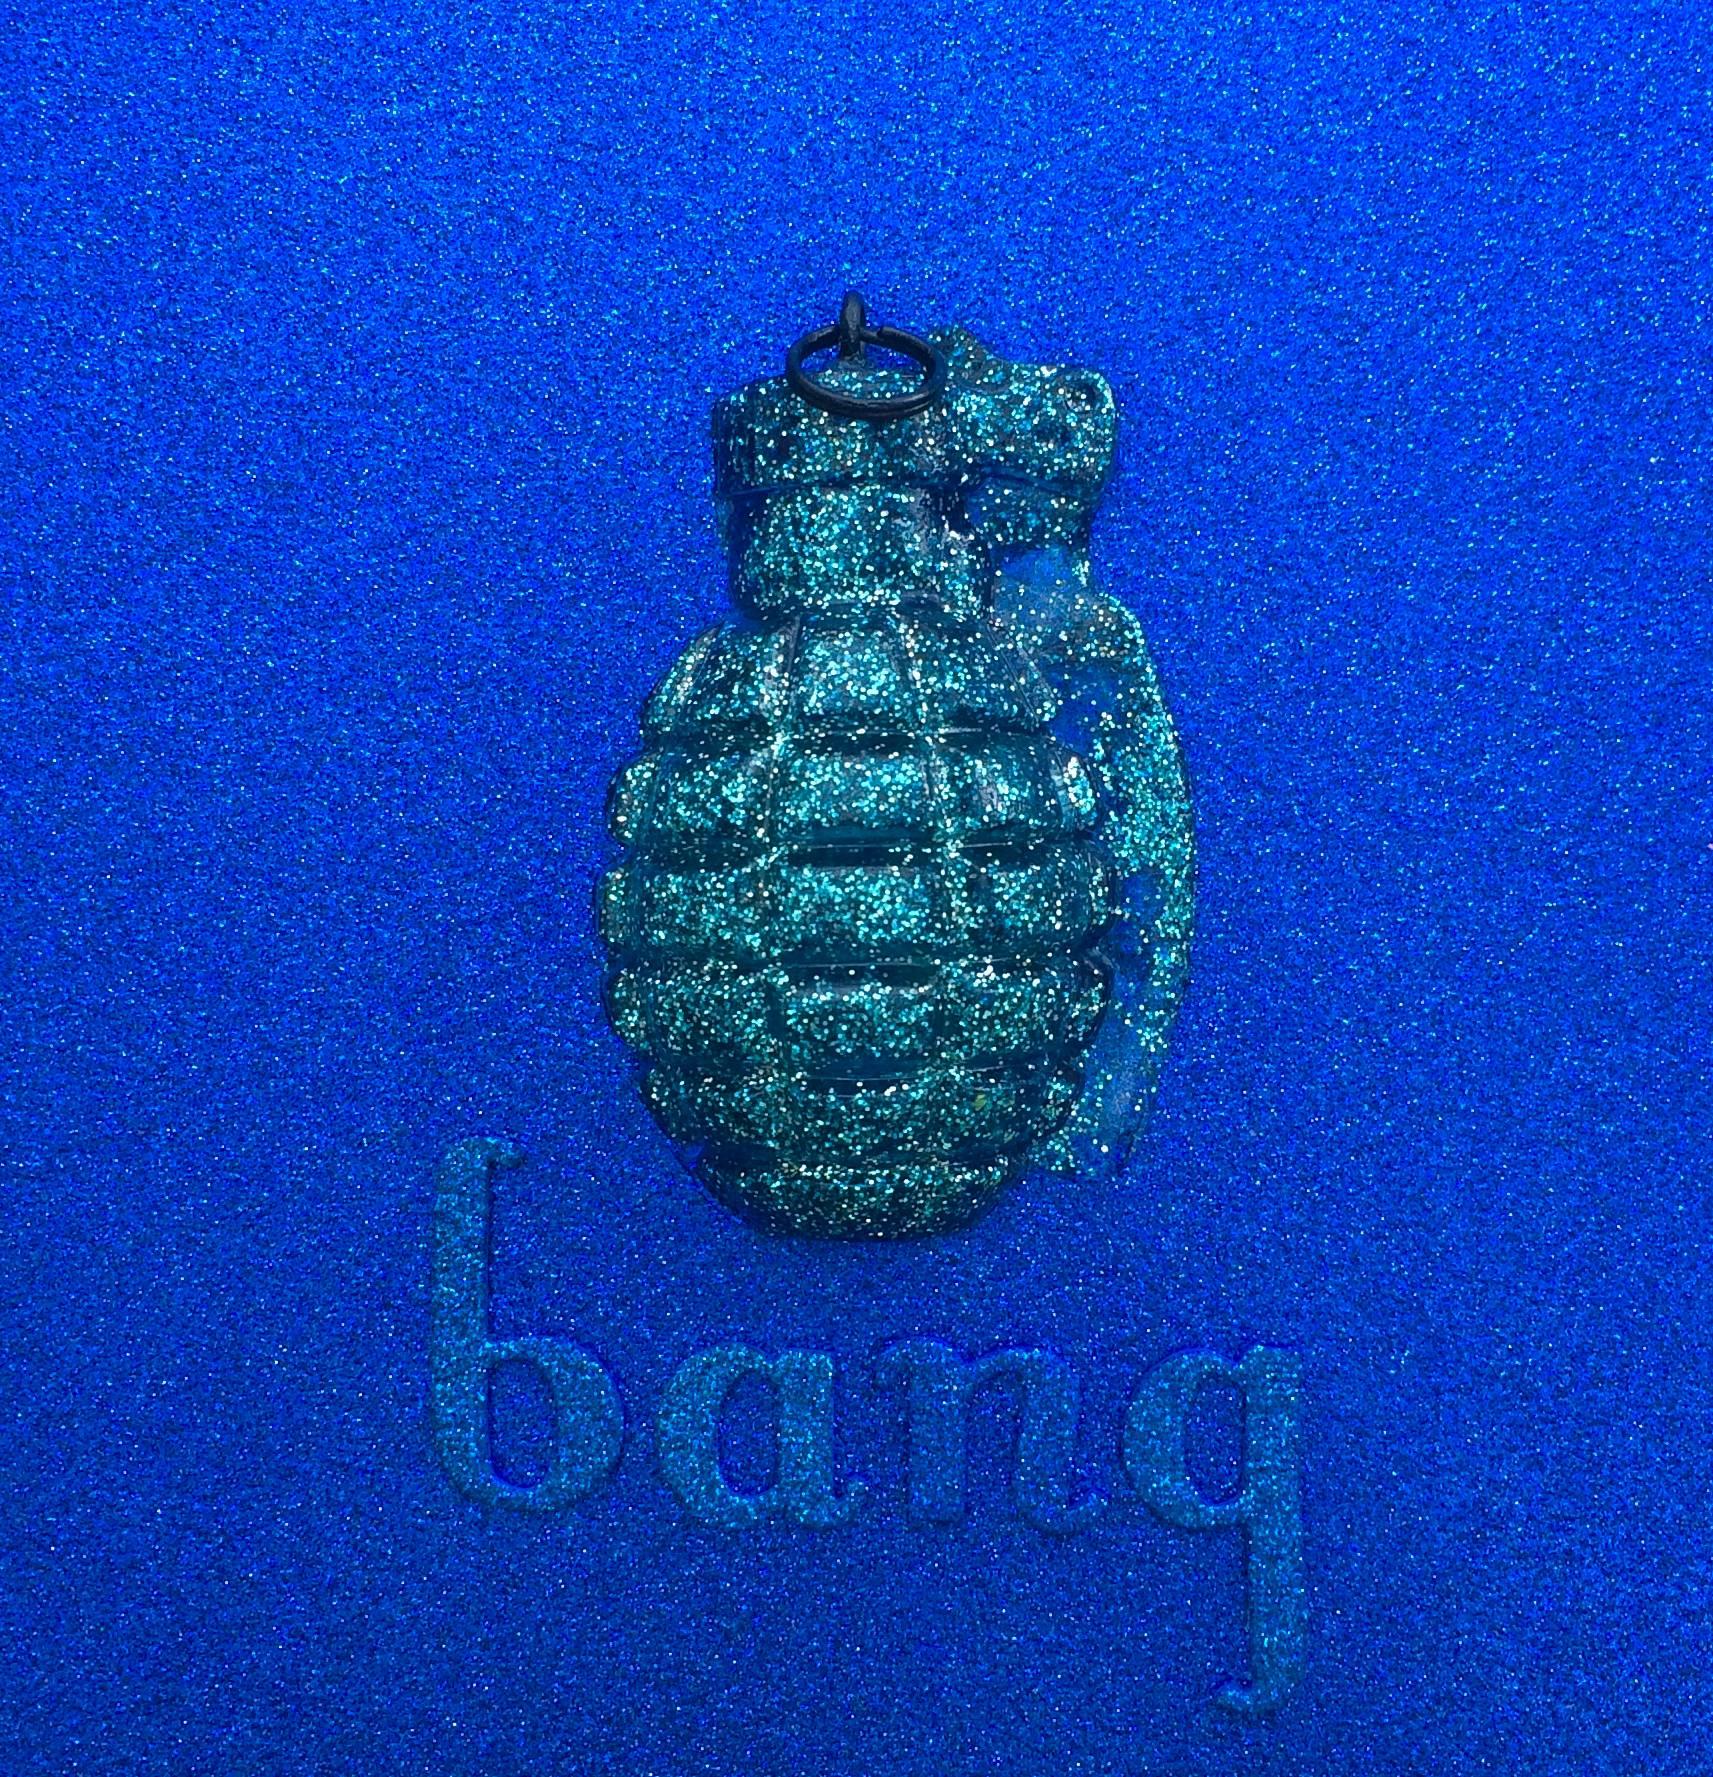 Bang Blue Original, Handcast, Resin from an Antique Grenade, Personally Signed - Art by Jana Nicole